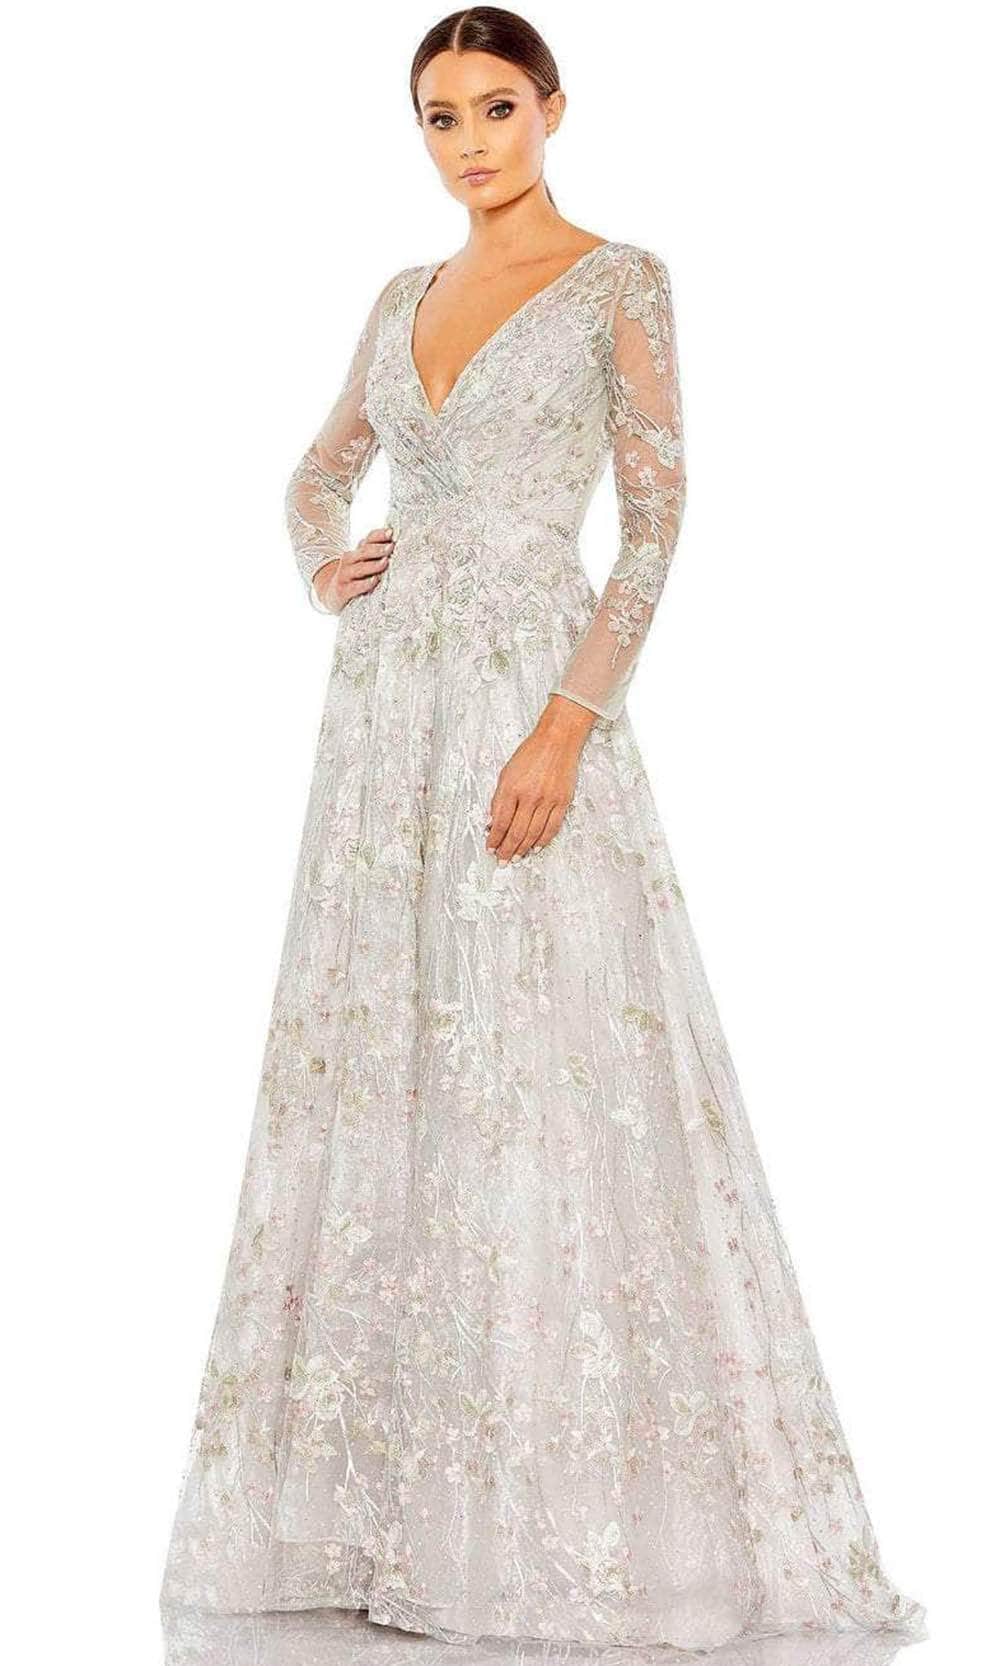 Image of Mac Duggal 20402 - Long Sleeve Mother of the Bride Dress